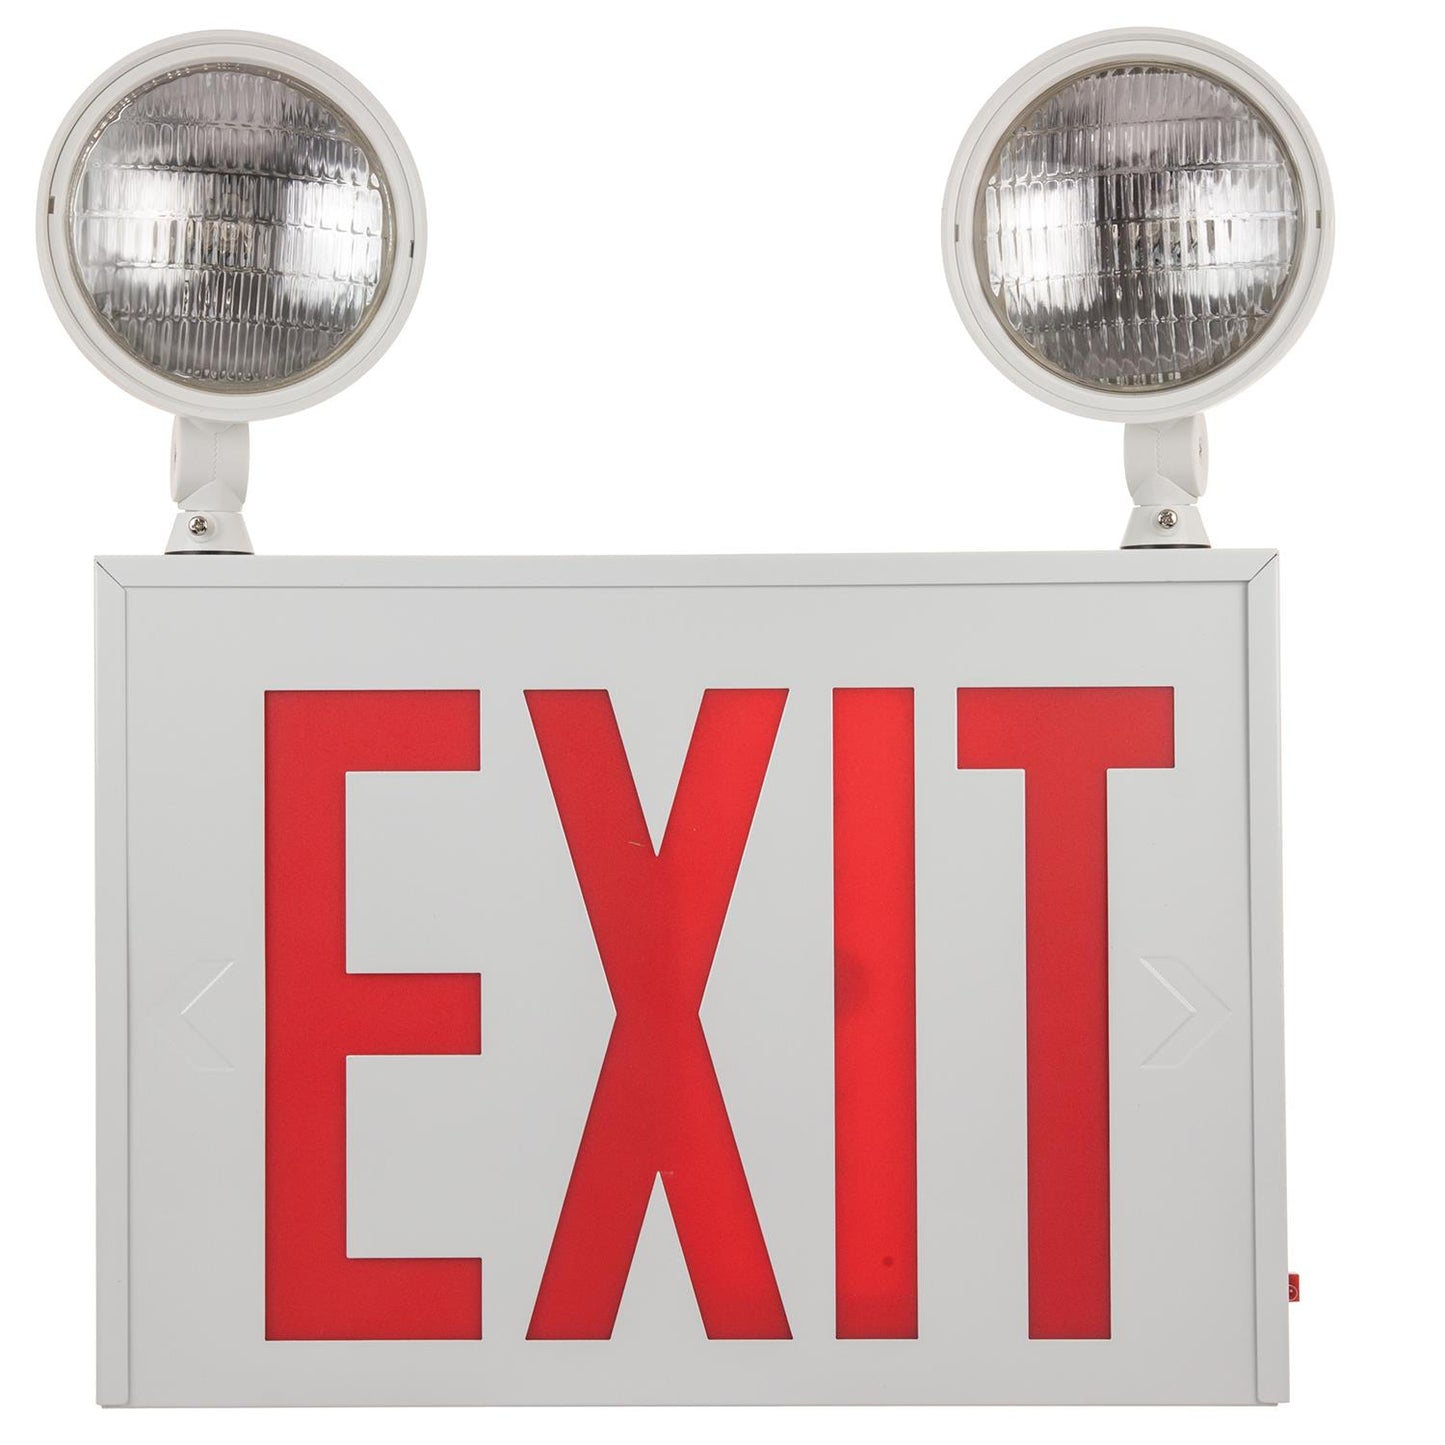 Surface Mount 2-3 Head Exit-Emergency Light Combo, White Housing, Single Faced White Plate, Red Letters, NYC Approved